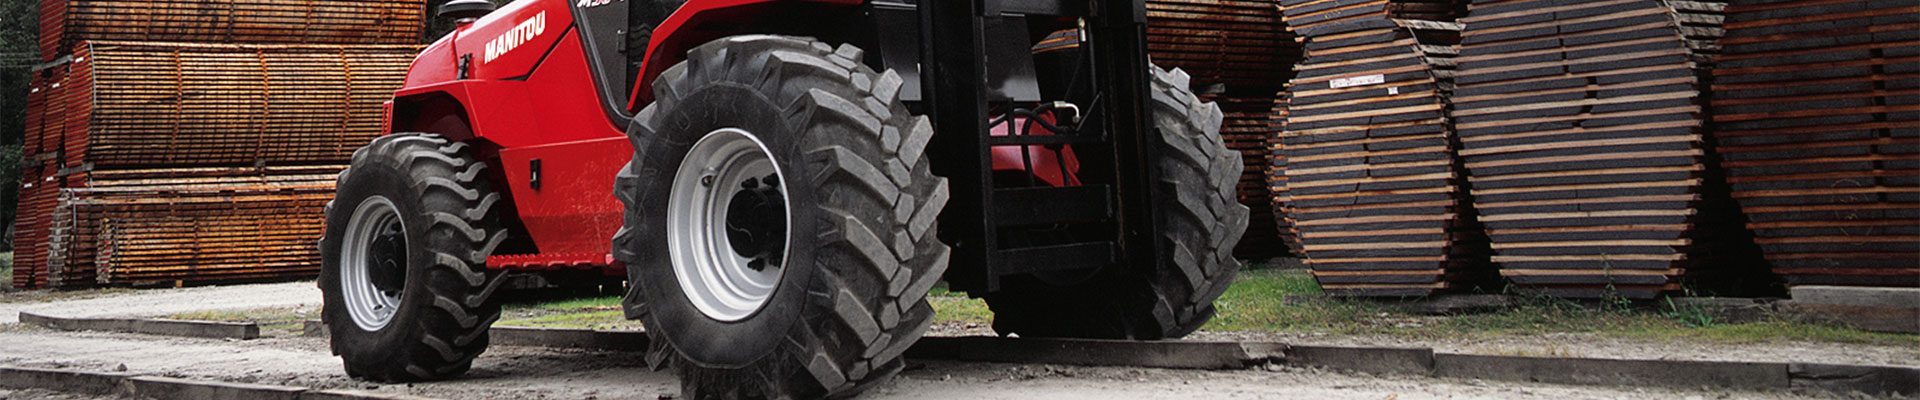 Manitou rental of a rough terrain forklift